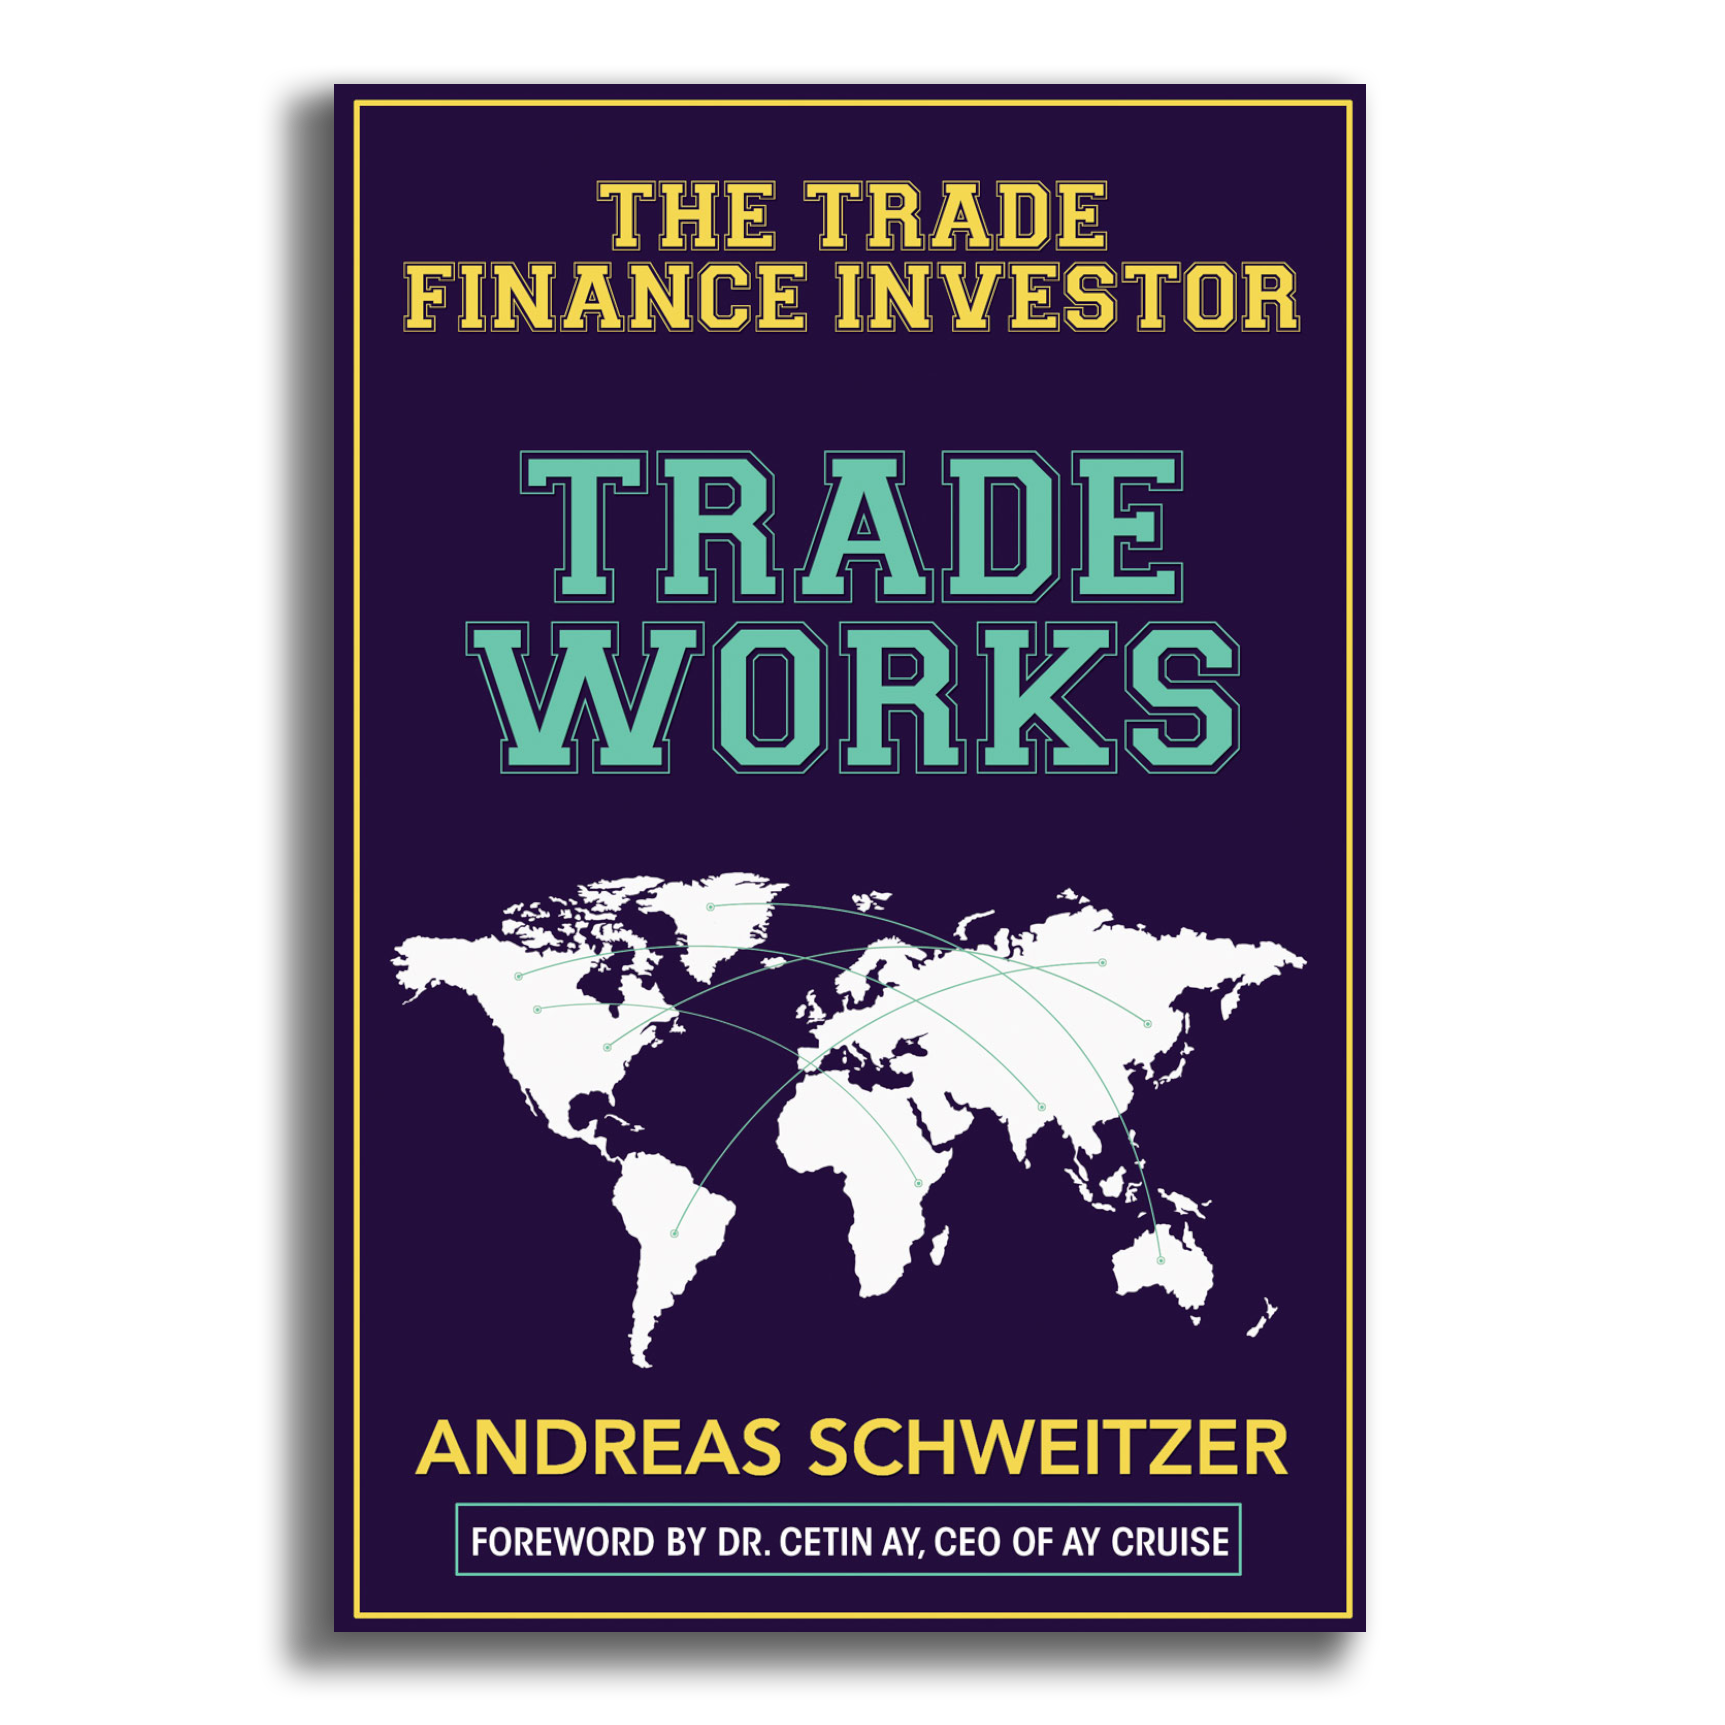 Trade works: The trade finance investor.